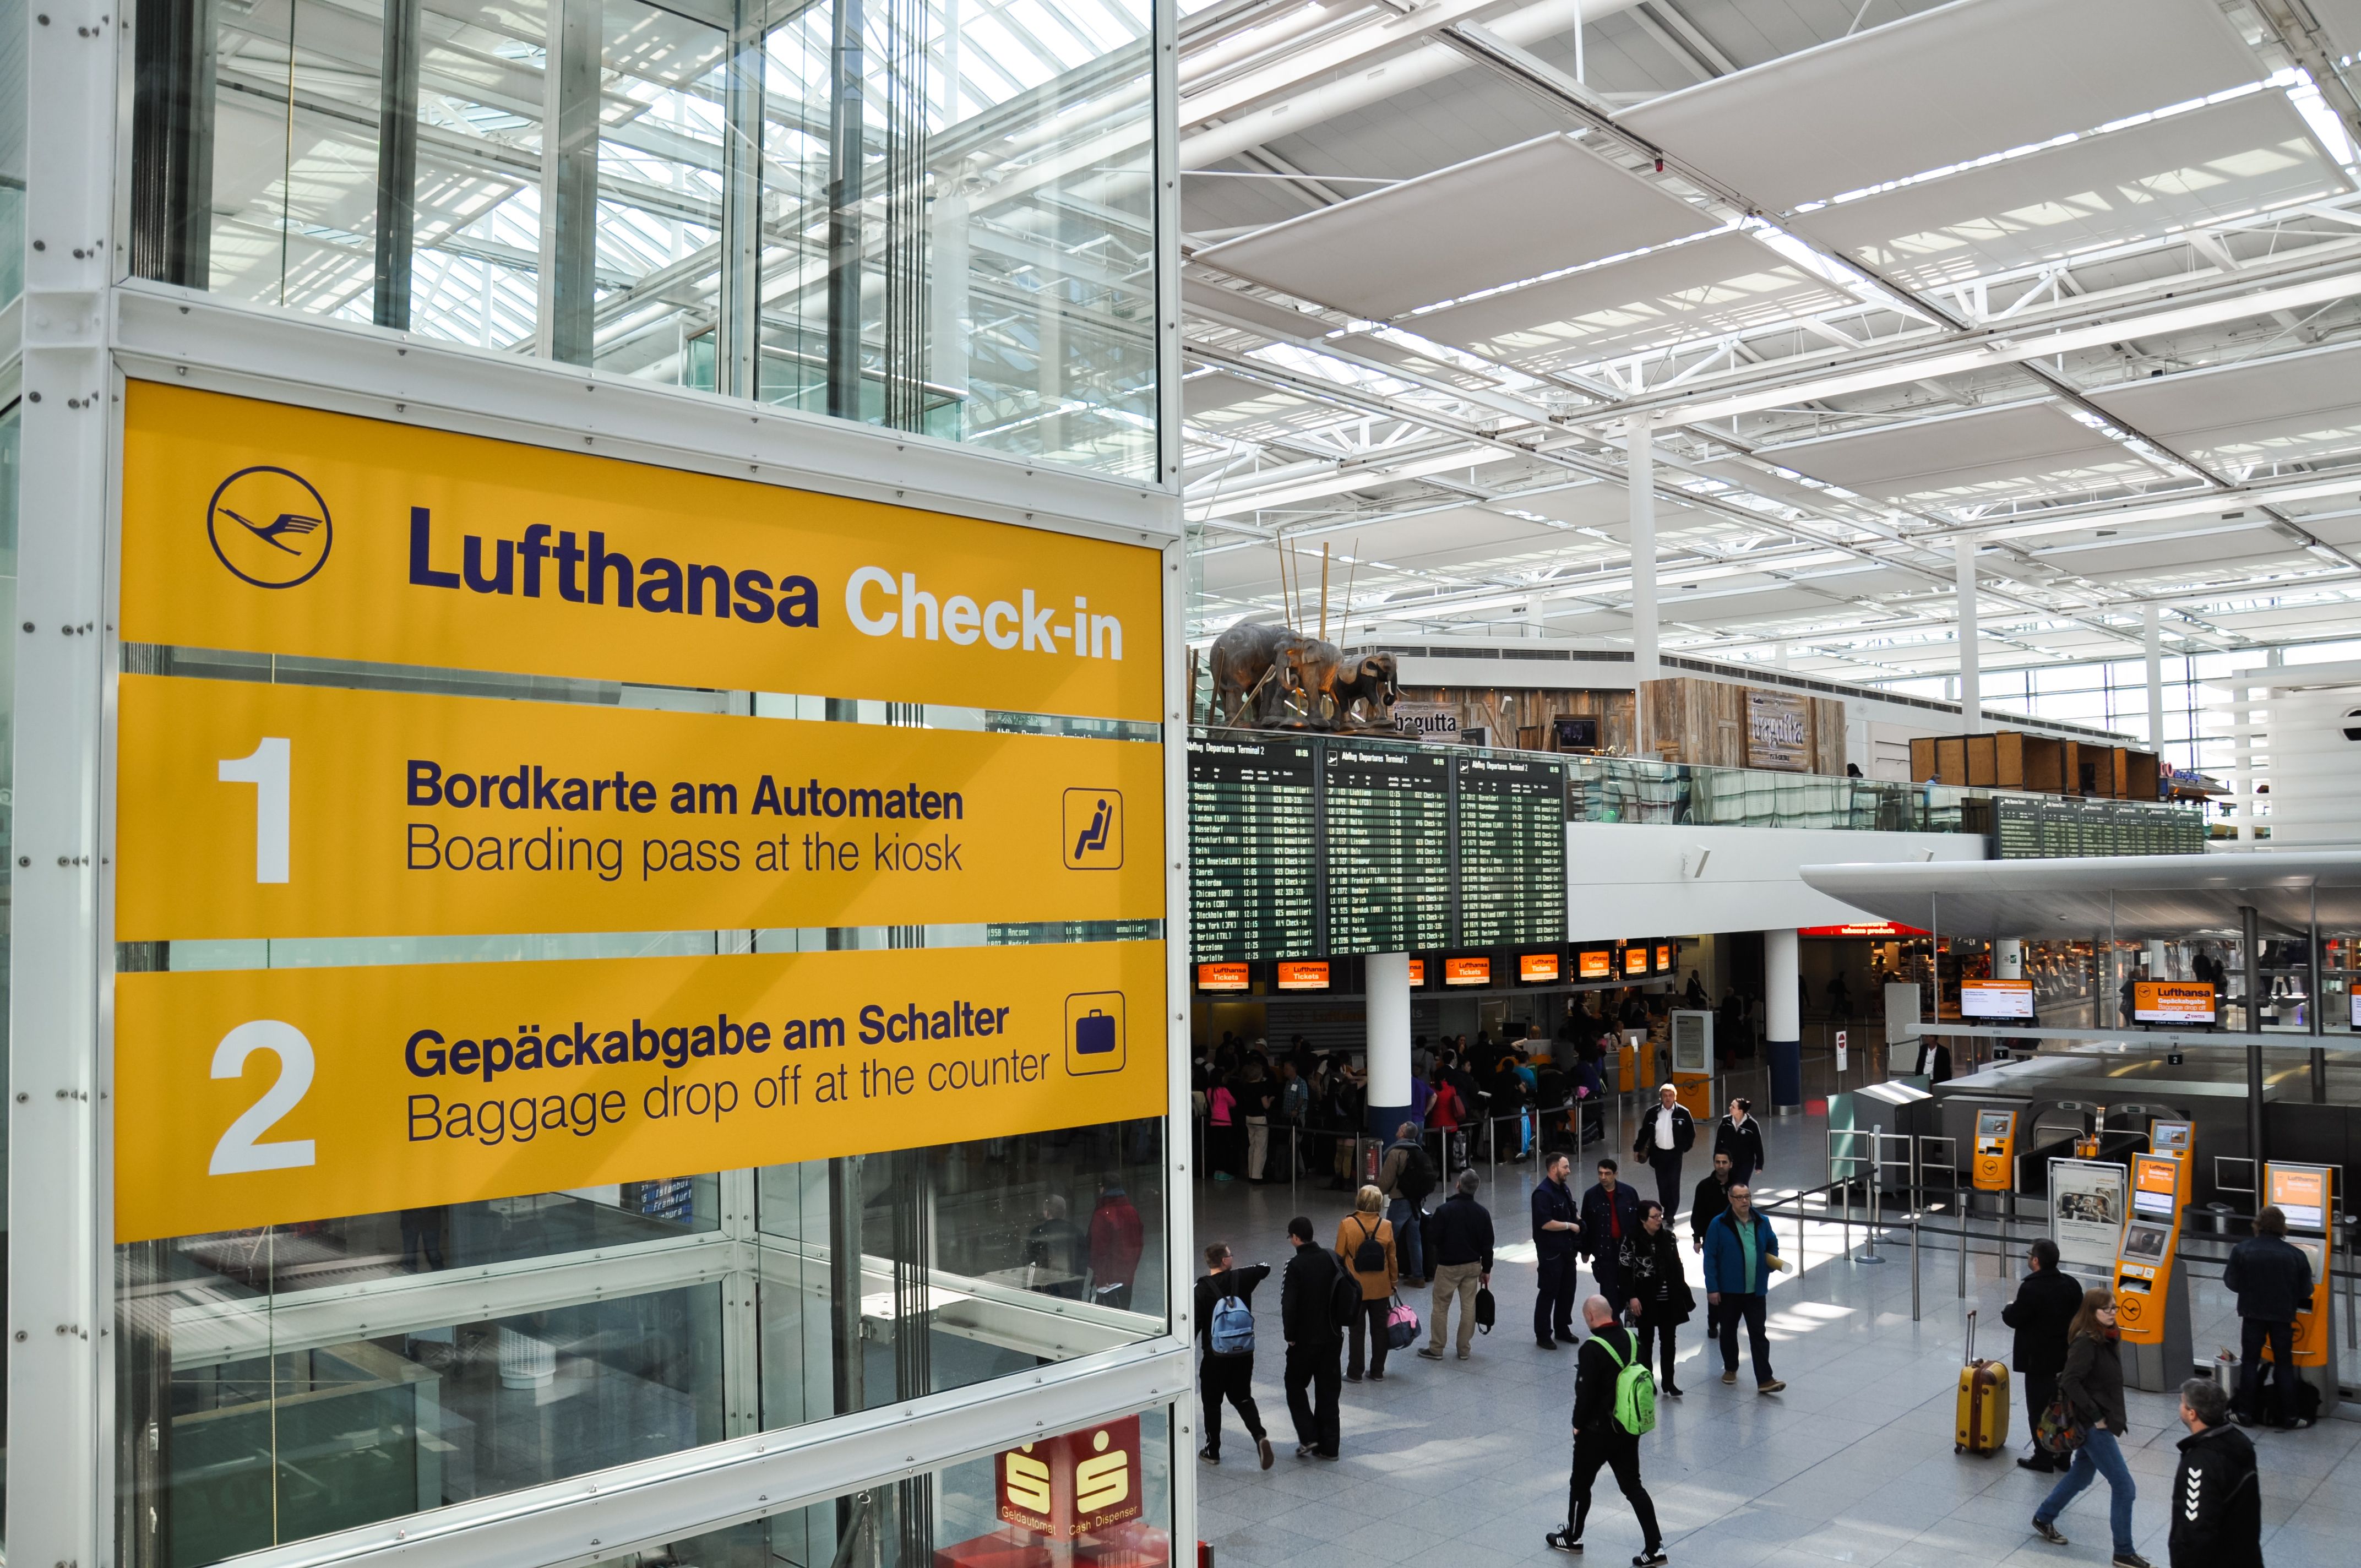 A sign for Lufthansa's check-in area at Munich airport.